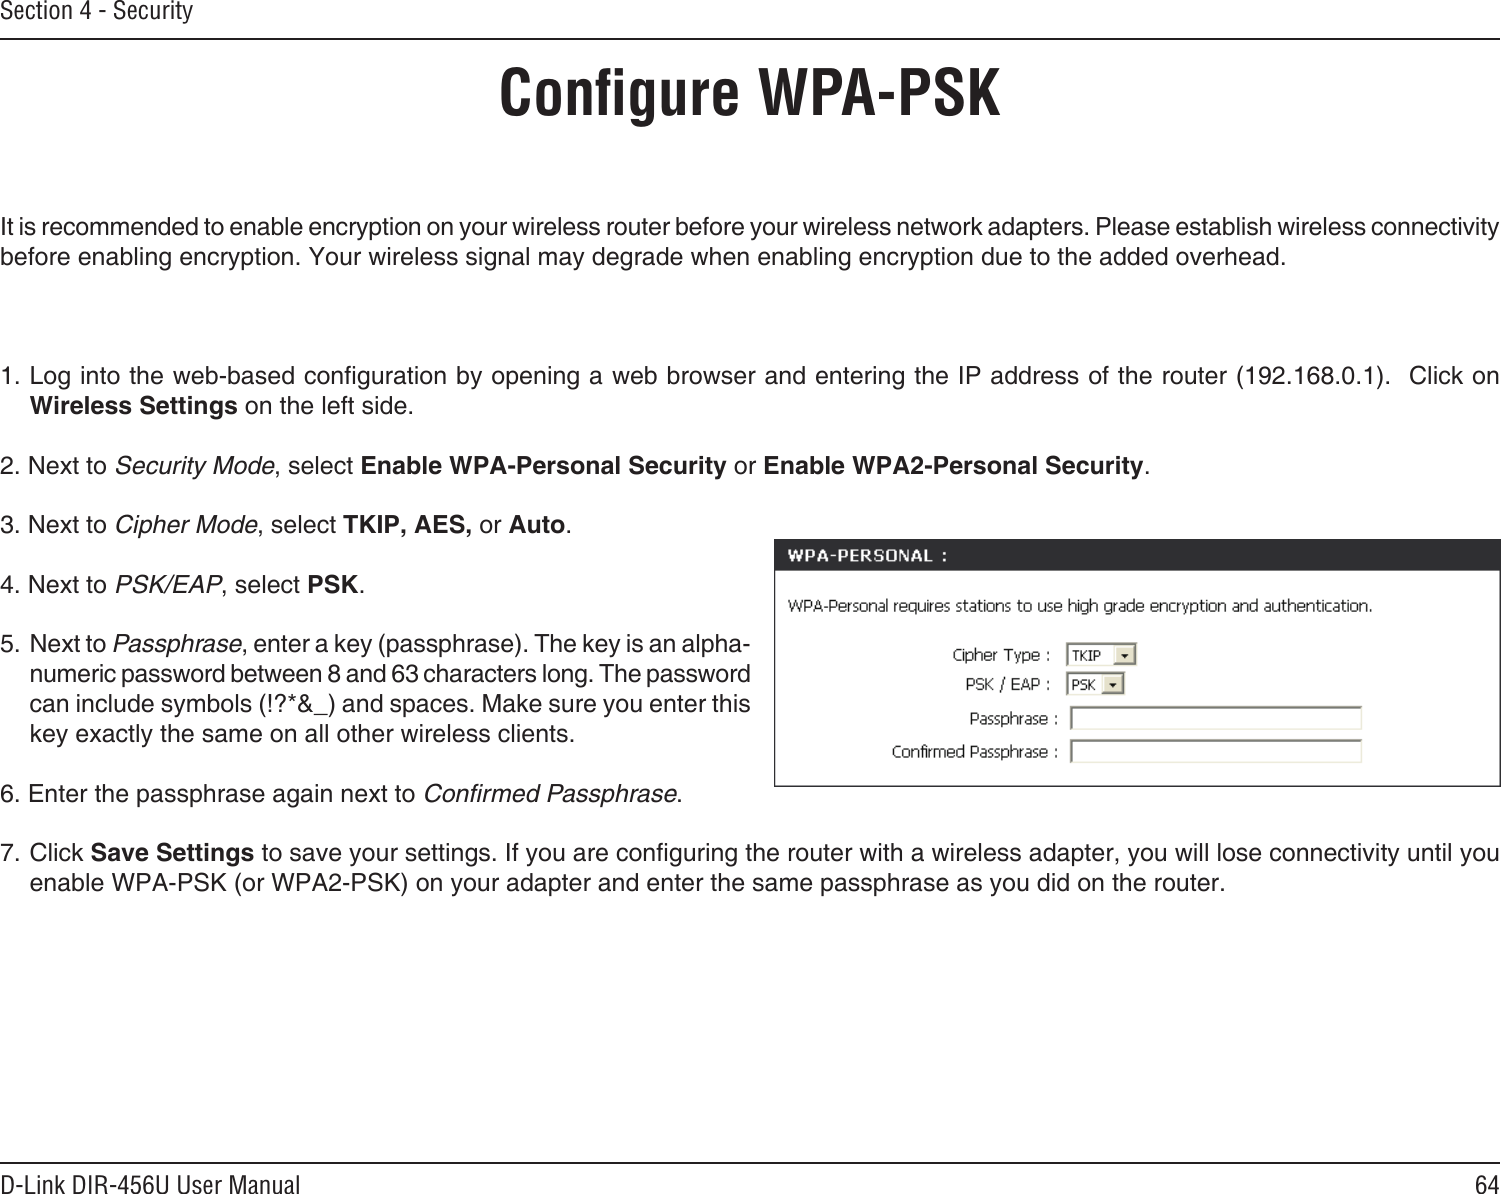 64D-Link DIR-456U User ManualSection 4 - SecurityConﬁgure WPA-PSKIt is recommended to enable encryption on your wireless router before your wireless network adapters. Please establish wireless connectivity before enabling encryption. Your wireless signal may degrade when enabling encryption due to the added overhead.1. Log into the web-based conguration by opening a web browser and entering the IP address of the router (192.168.0.1).  Click on Wireless Settings on the left side.2. Next to Security Mode, select Enable WPA-Personal Security or Enable WPA2-Personal Security.3. Next to Cipher Mode, select TKIP, AES, or Auto.4. Next to PSK/EAP, select PSK.5. Next to Passphrase, enter a key (passphrase). The key is an alpha-numeric password between 8 and 63 characters long. The password can include symbols (!?*&amp;_) and spaces. Make sure you enter this key exactly the same on all other wireless clients.6. Enter the passphrase again next to Conﬁrmed Passphrase.7. Click Save Settings to save your settings. If you are conguring the router with a wireless adapter, you will lose connectivity until you enable WPA-PSK (or WPA2-PSK) on your adapter and enter the same passphrase as you did on the router.